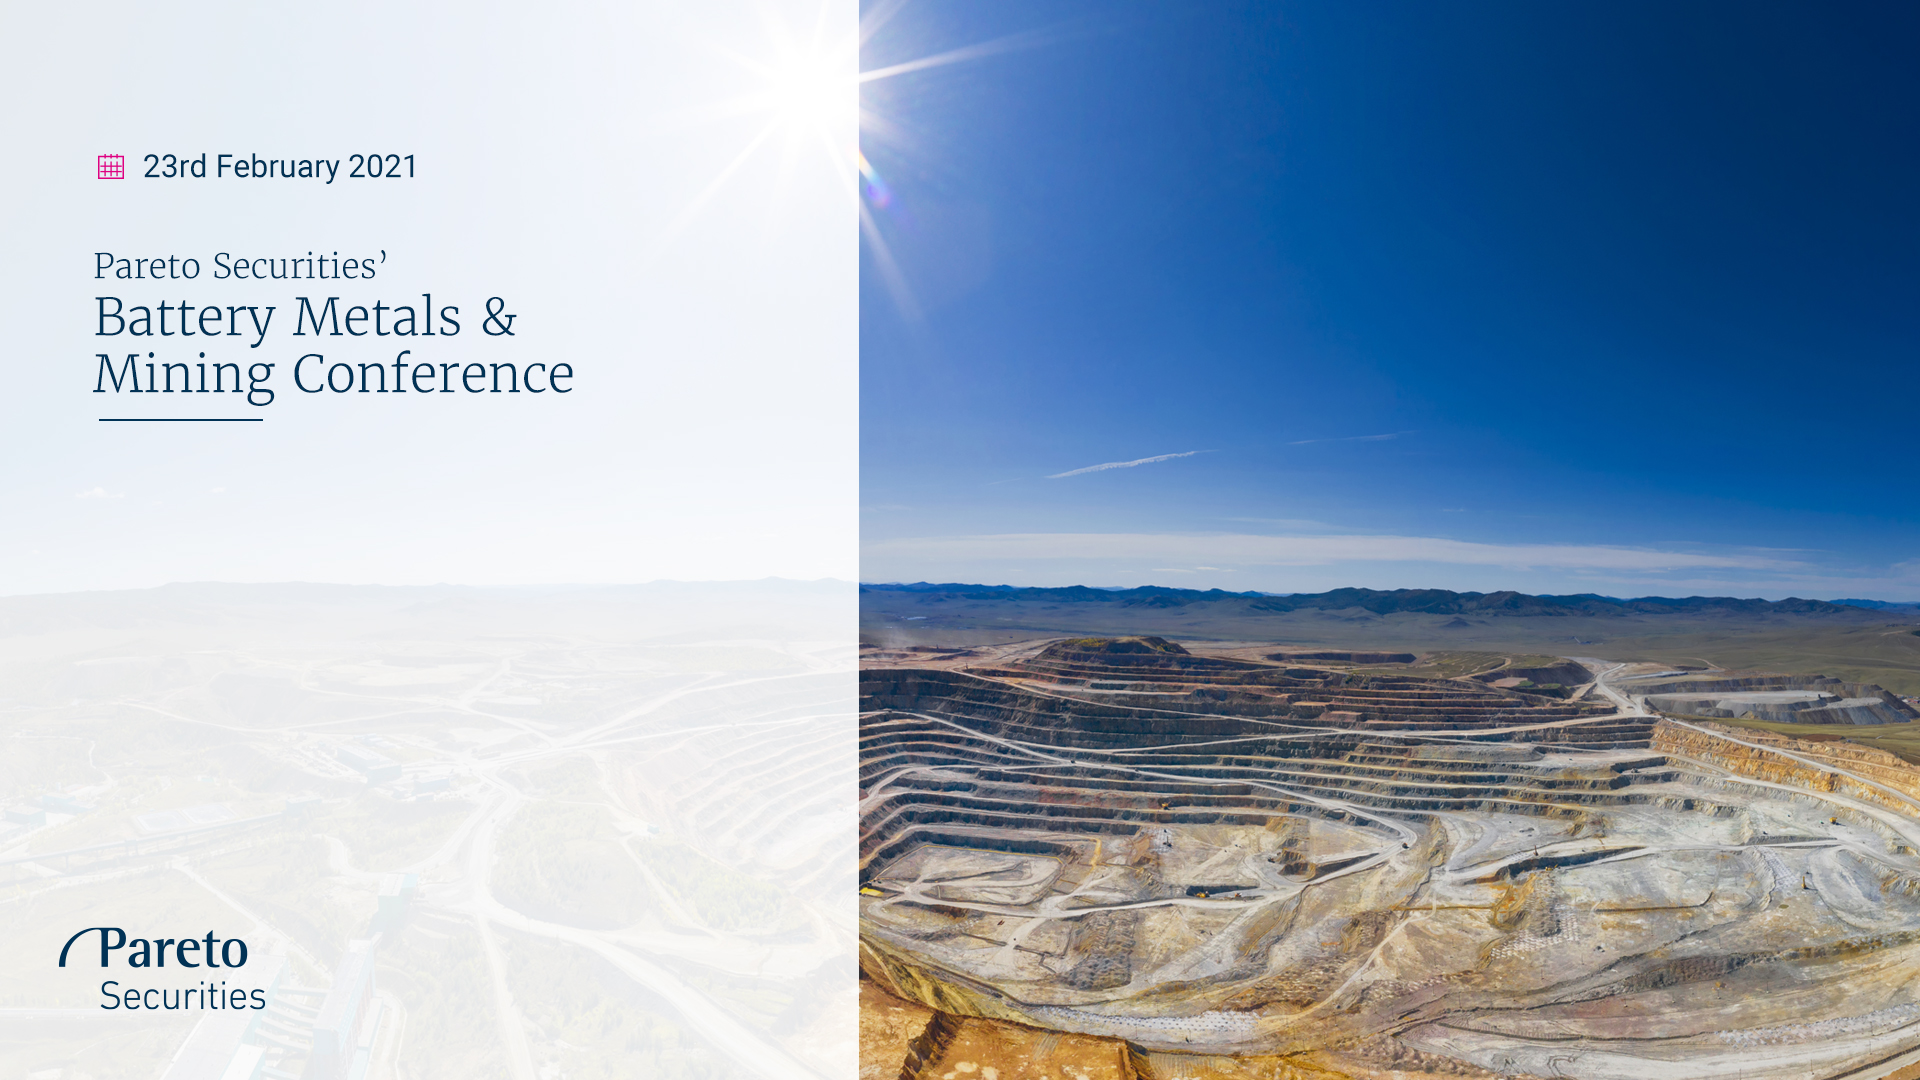 Pareto Securities' Battery Metals & Mining Conference